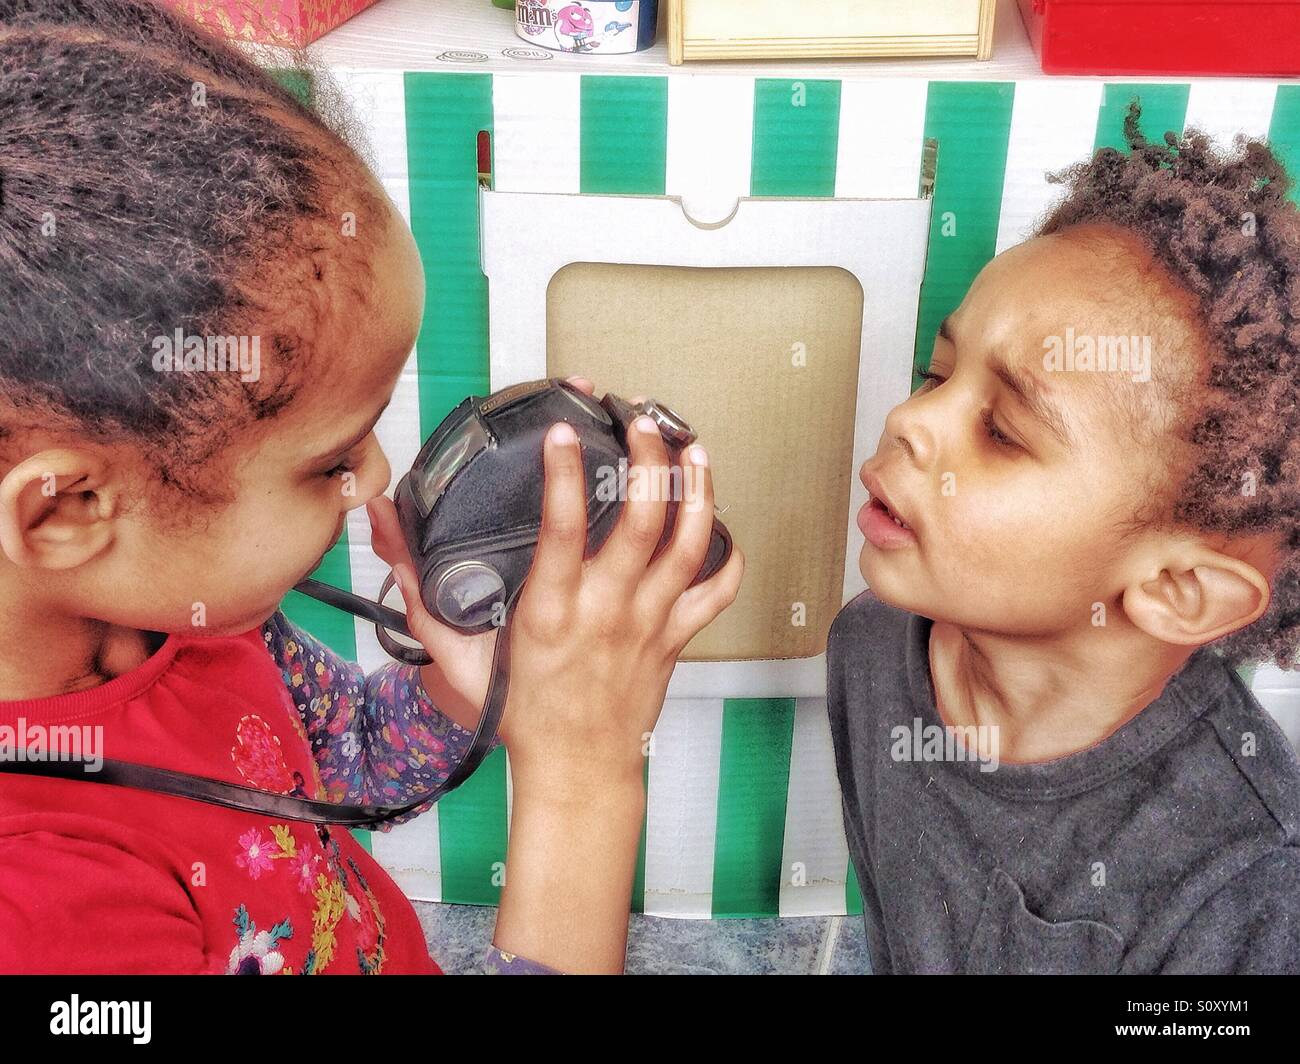 Two children playing with a vintage camera. Stock Photo